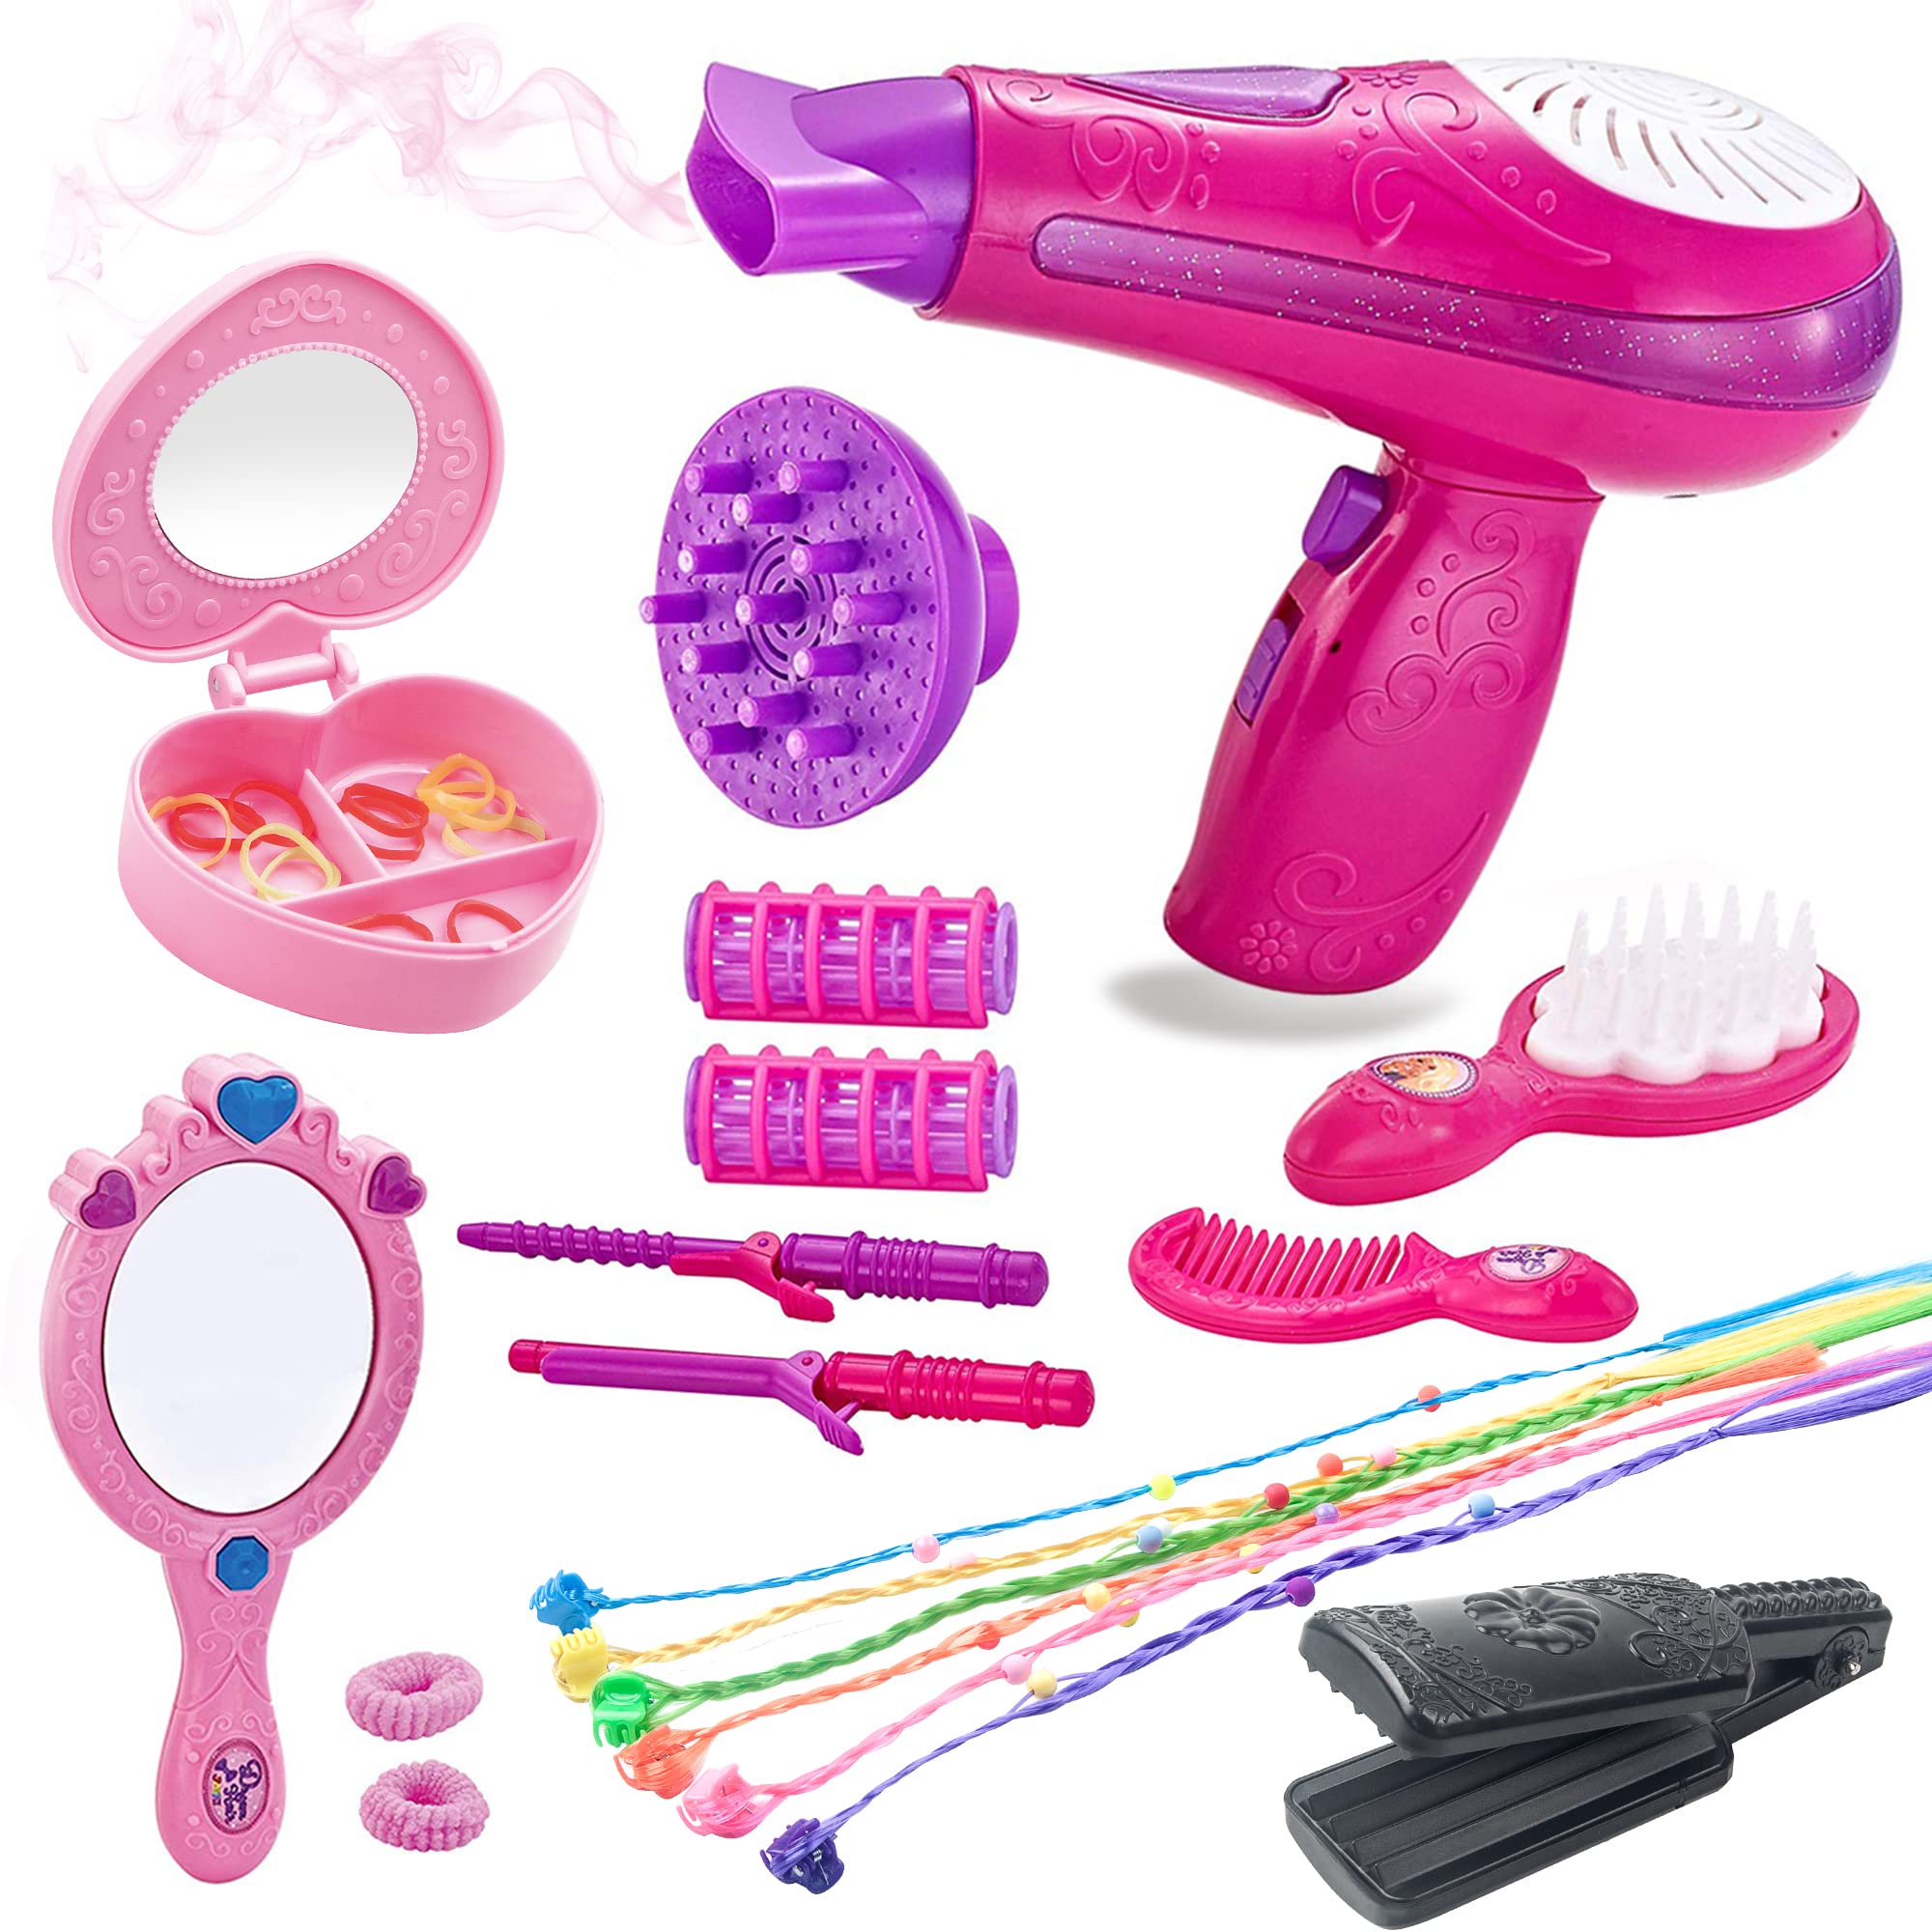 Bettina Little Girls Beauty Hair Salon Toy Kit With Toy Hairdryer, Mirror  Other Accessories, Fashion Pretend Makeup Set For Kid